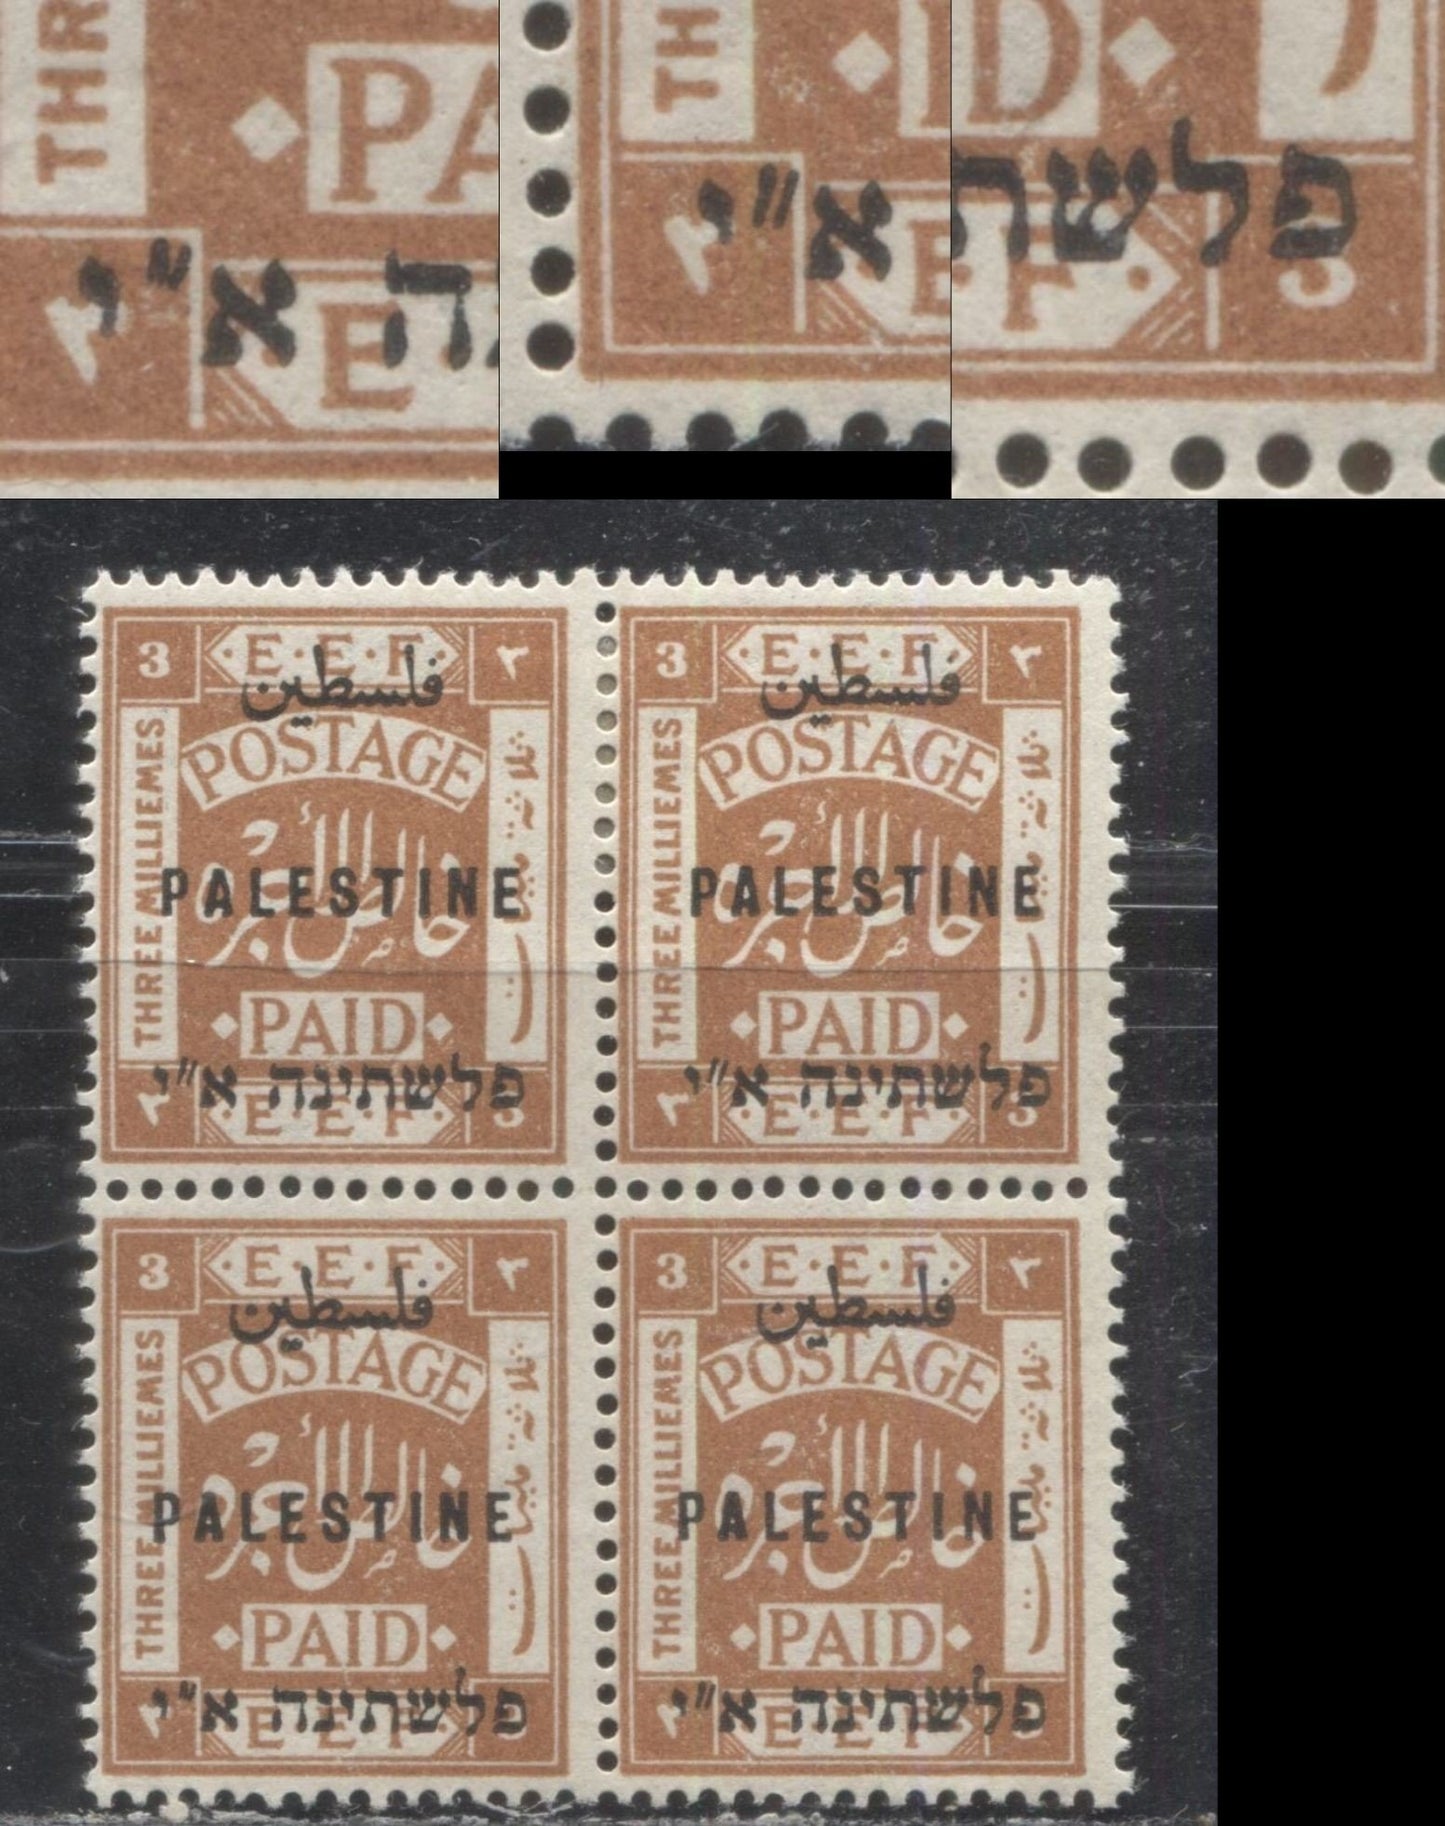 Lot 29 Palestine SG#62 3m Yellowish Brown "Postage Paid" and "E.E.F" in Frame, 1921-1922 First London Overprinted Issue, A Fine OG & Fine NH Block of 4, Perf. 15 x 14, Royal Cypher Watermark, Overprint Types 3-4 and 9-10